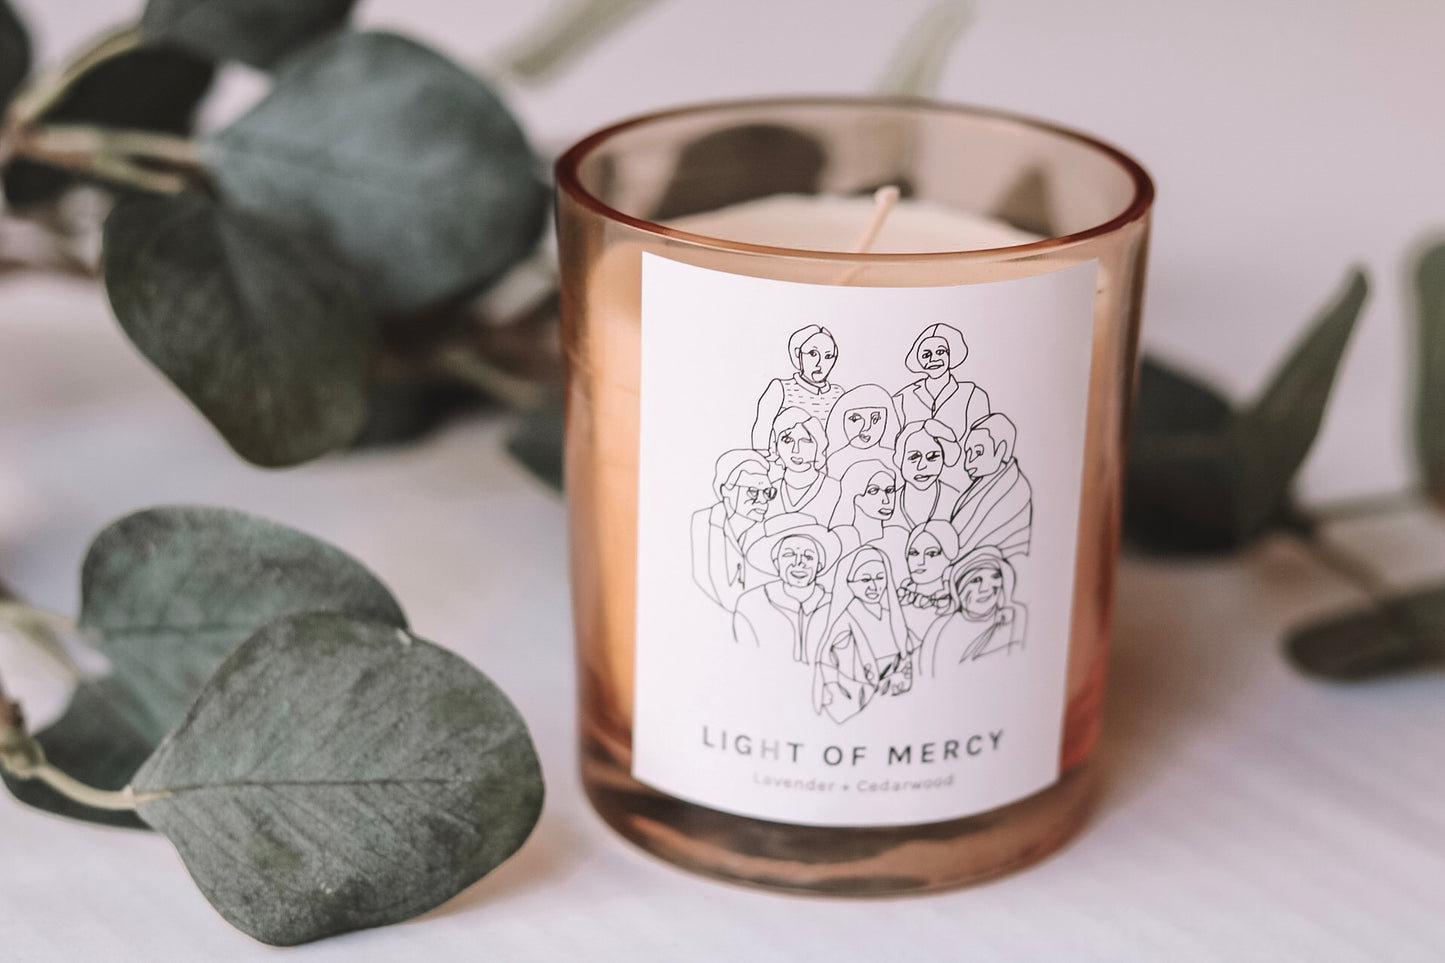 LIGHT OF MERCY CANDLE